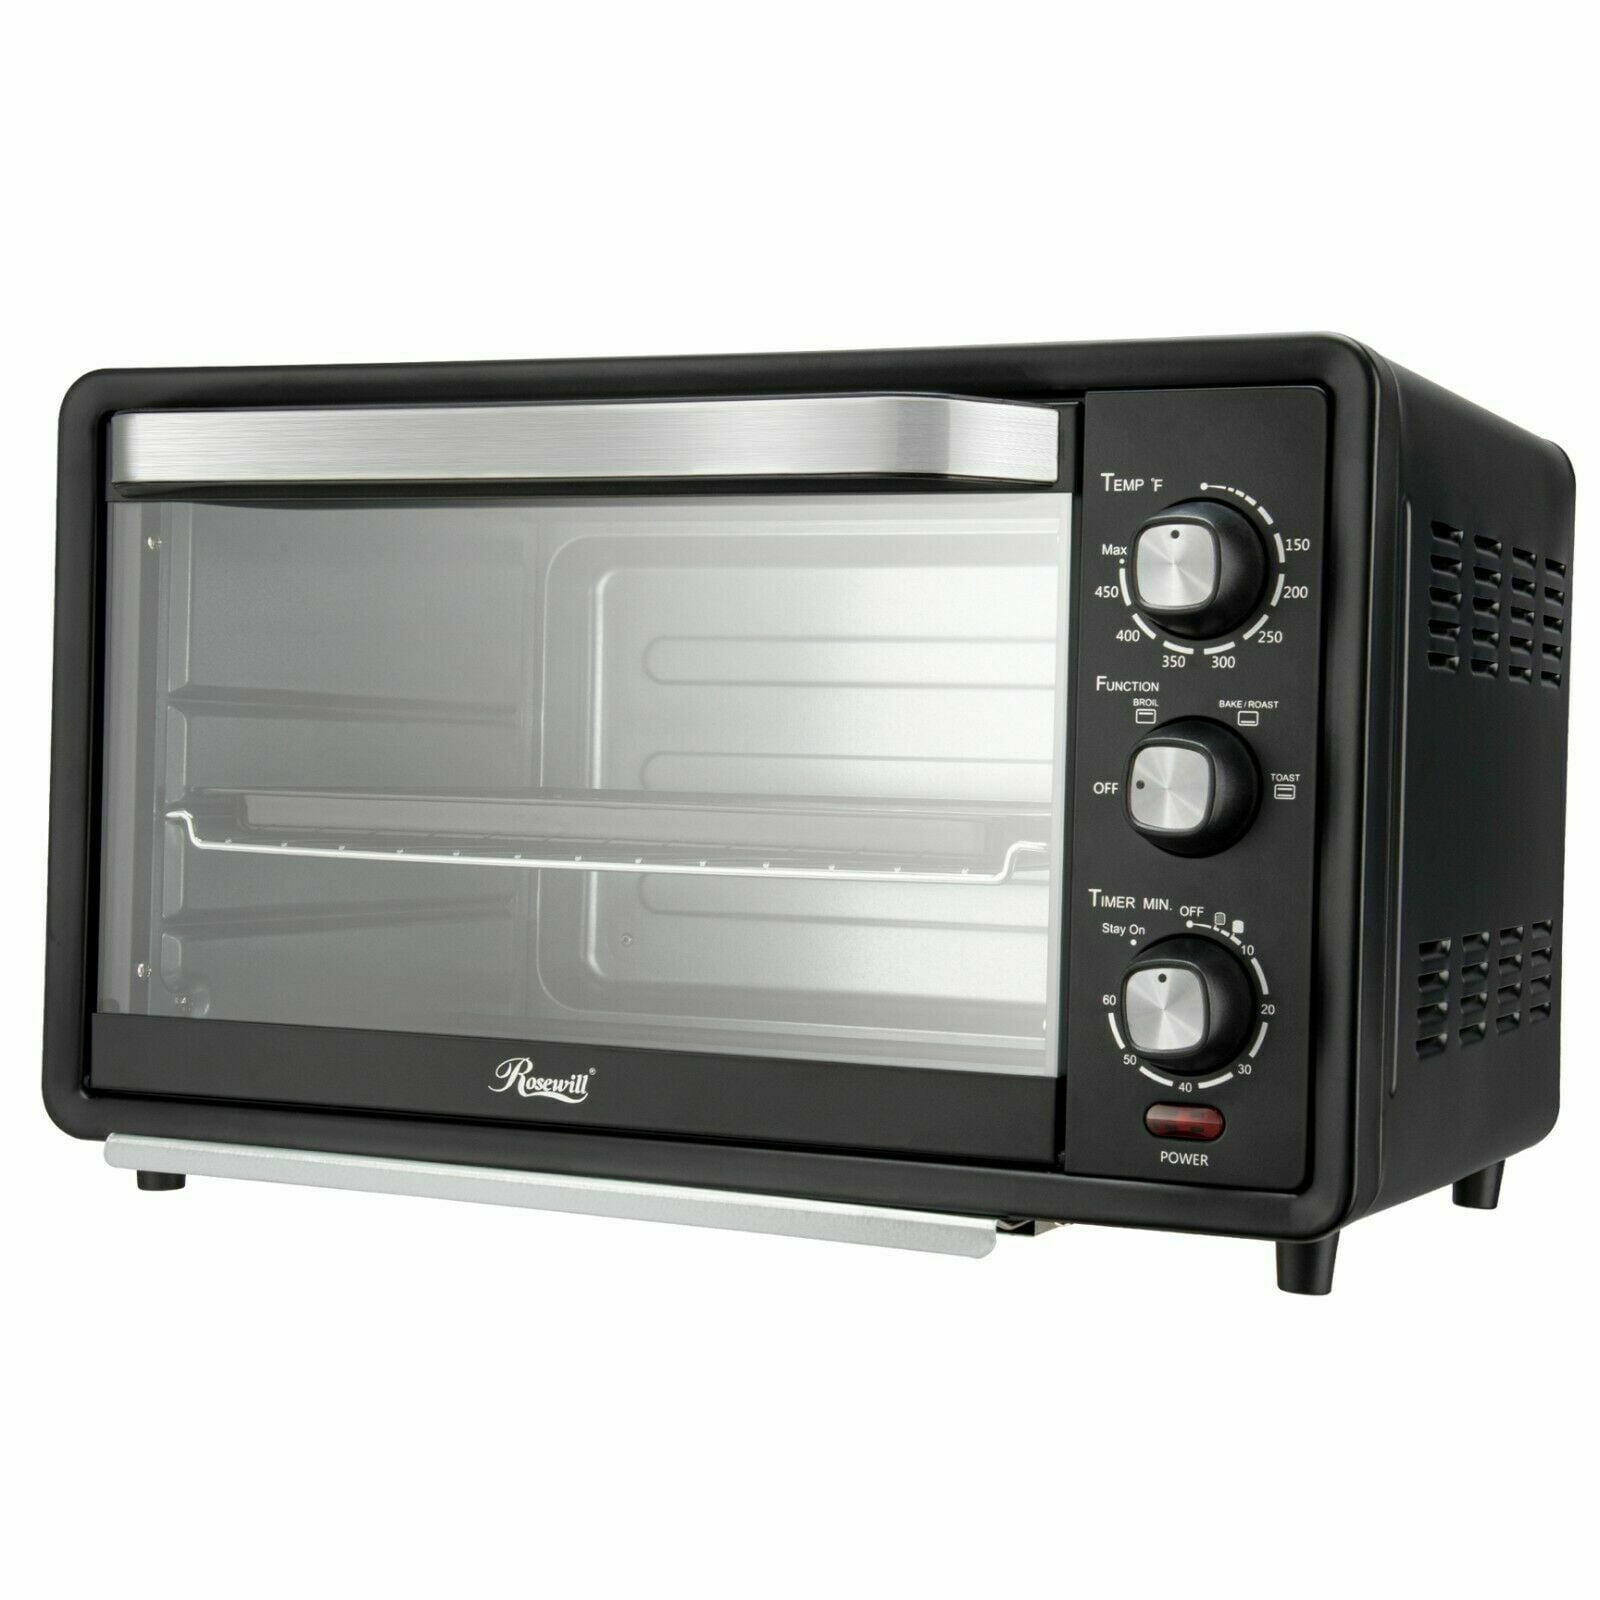 Rosewill 6-Slice Toaster Oven, Stainless Steel Countertop ...